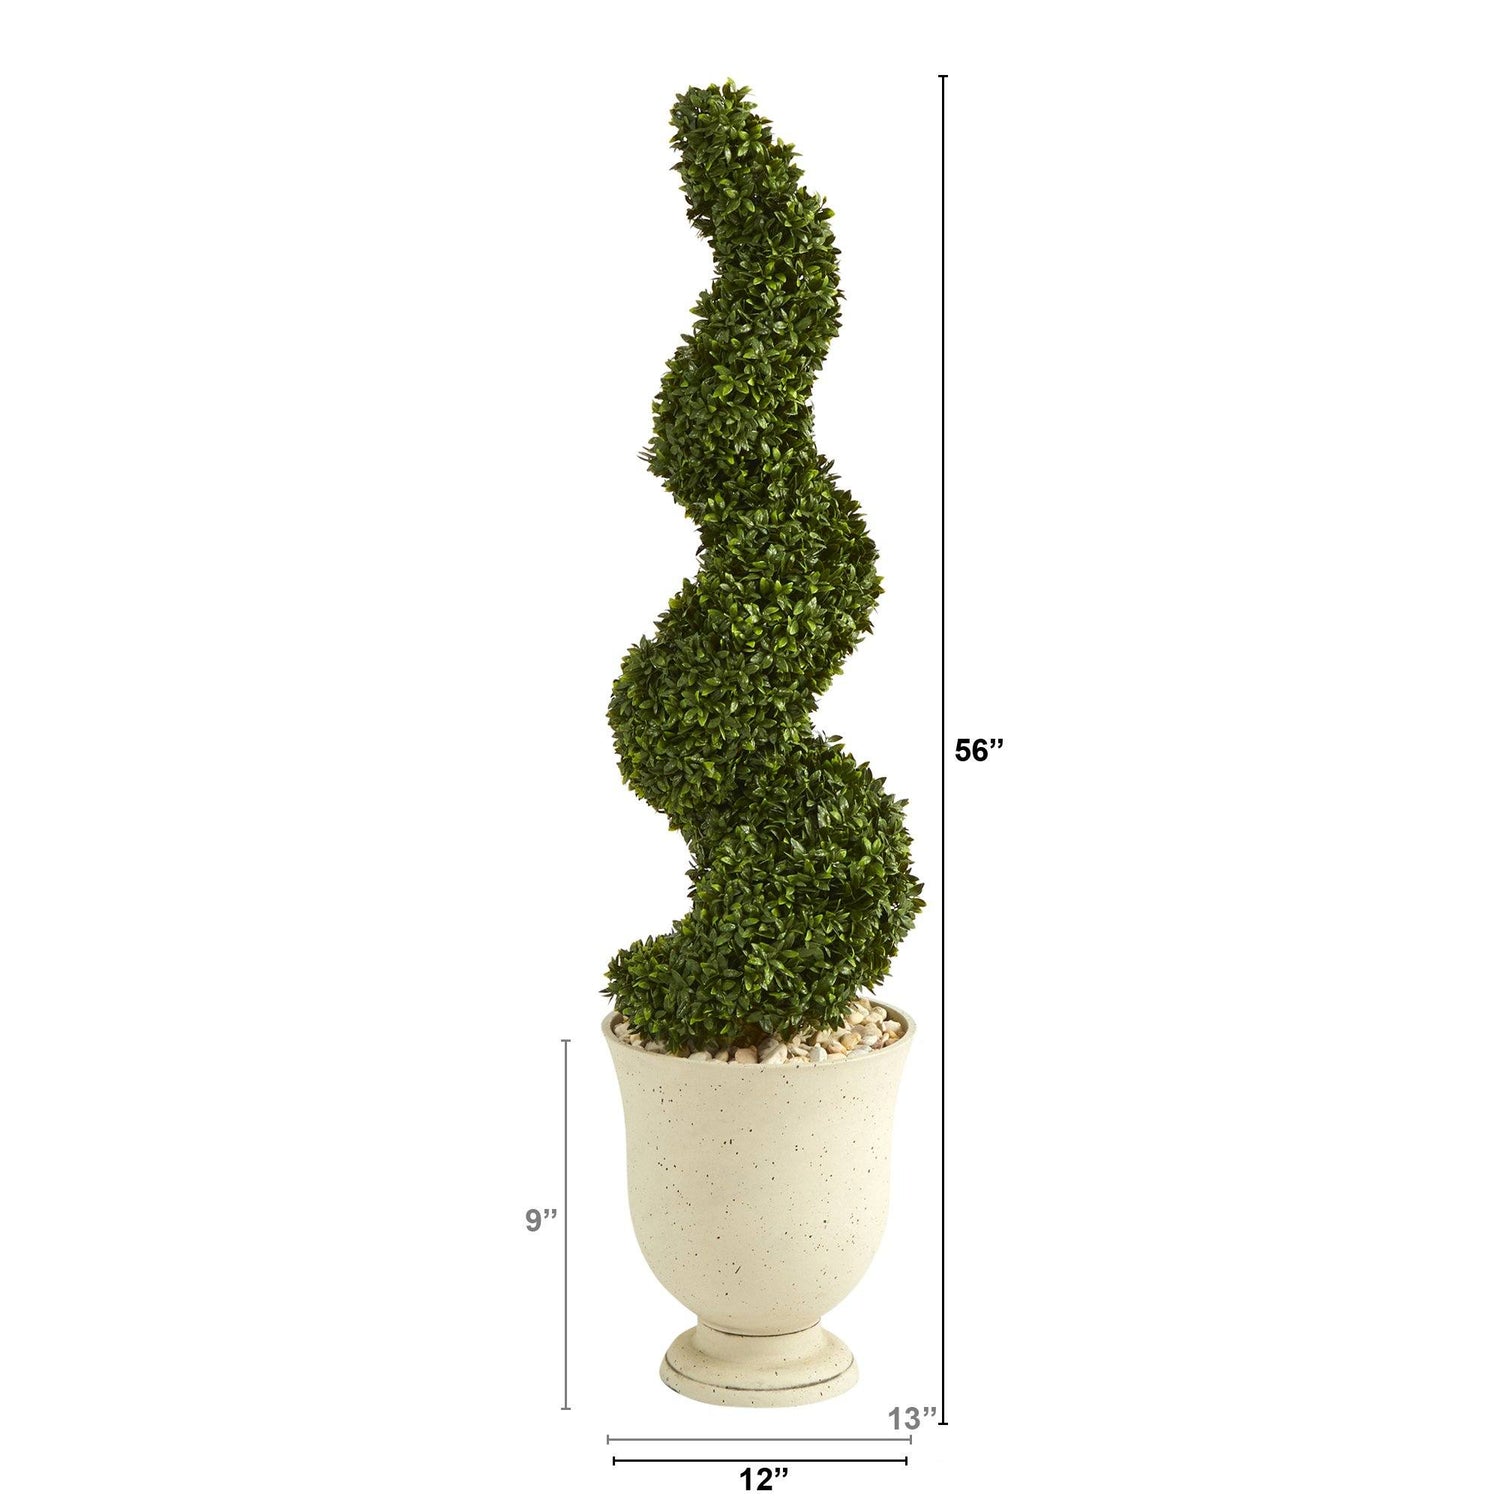 56” Spiral Hazel Leaf Artificial Topiary Tree in Decorative Urn